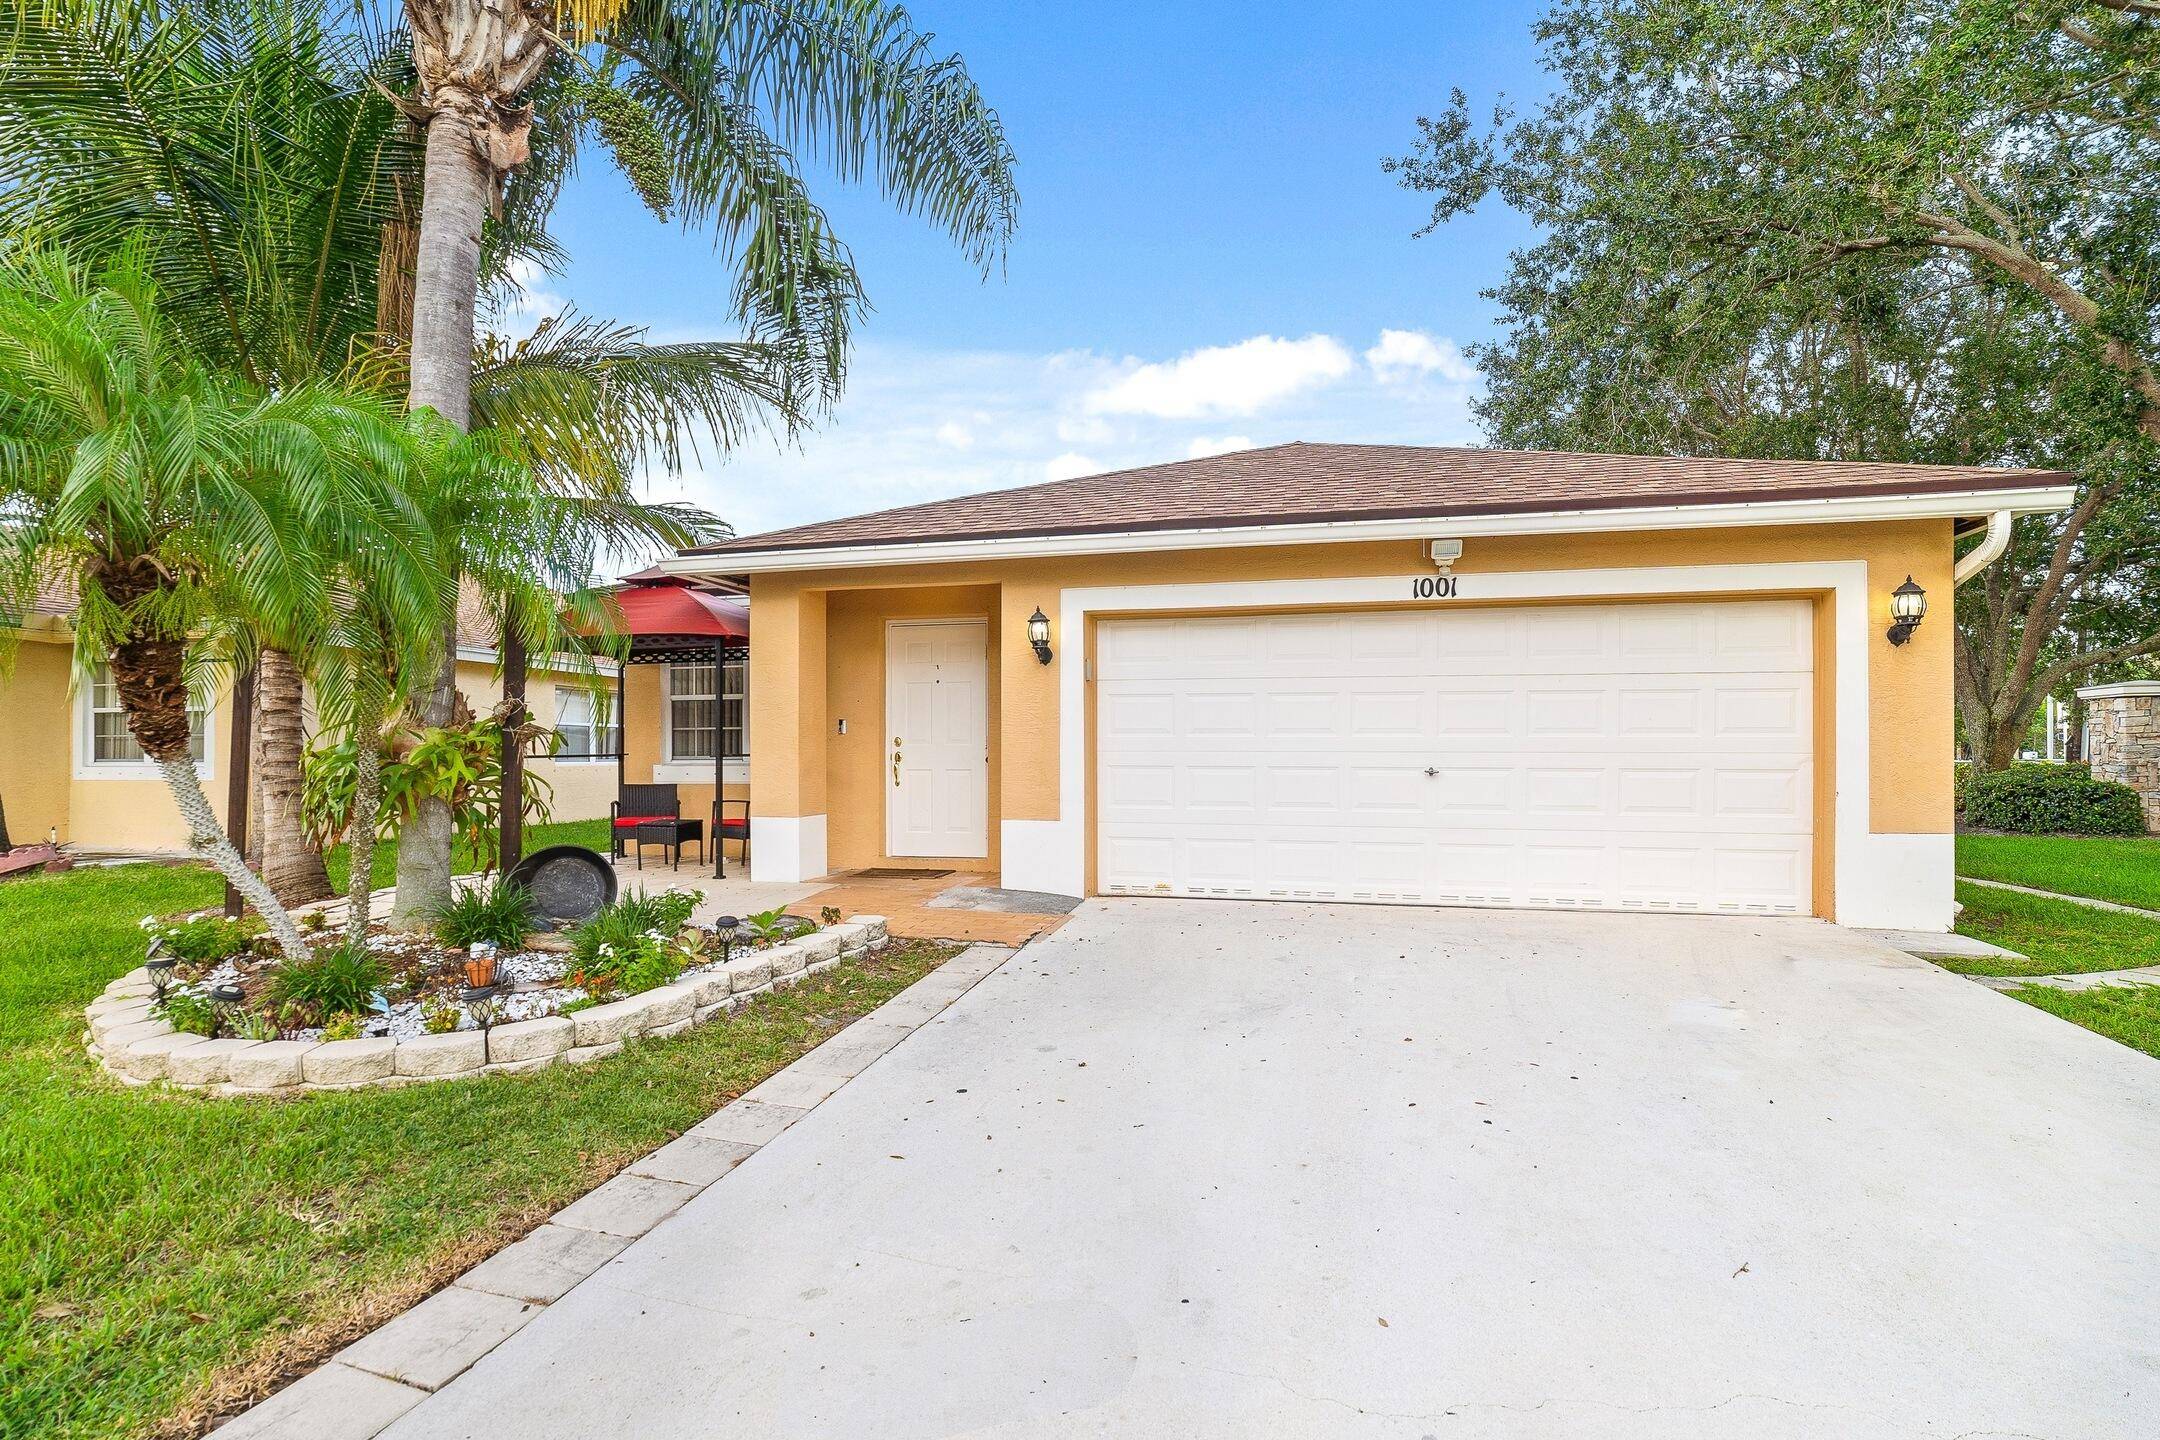 This phenomenal 3 bedroom, 2 bathroom, one story home with a 2 car garage rests on a private, fenced in, 0.